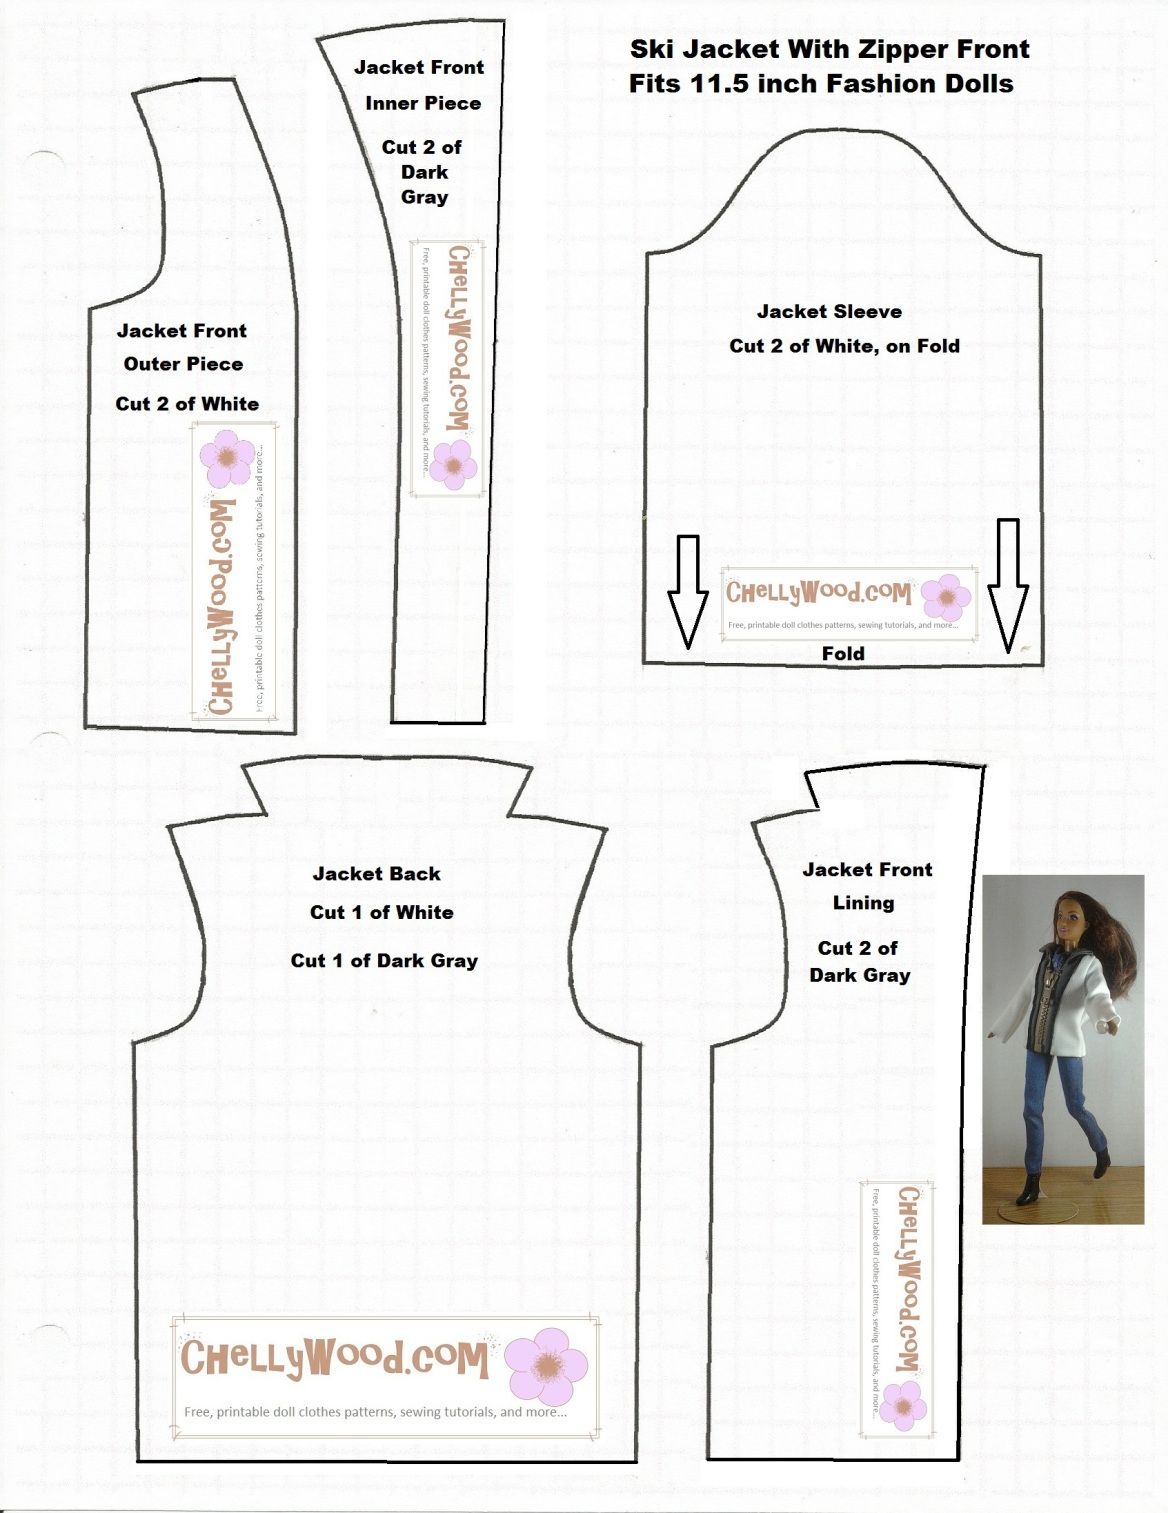 Image Of Printable Sewing Pattern For A Ski Coat Or Winter Jacket To - Free Printable Sewing Patterns